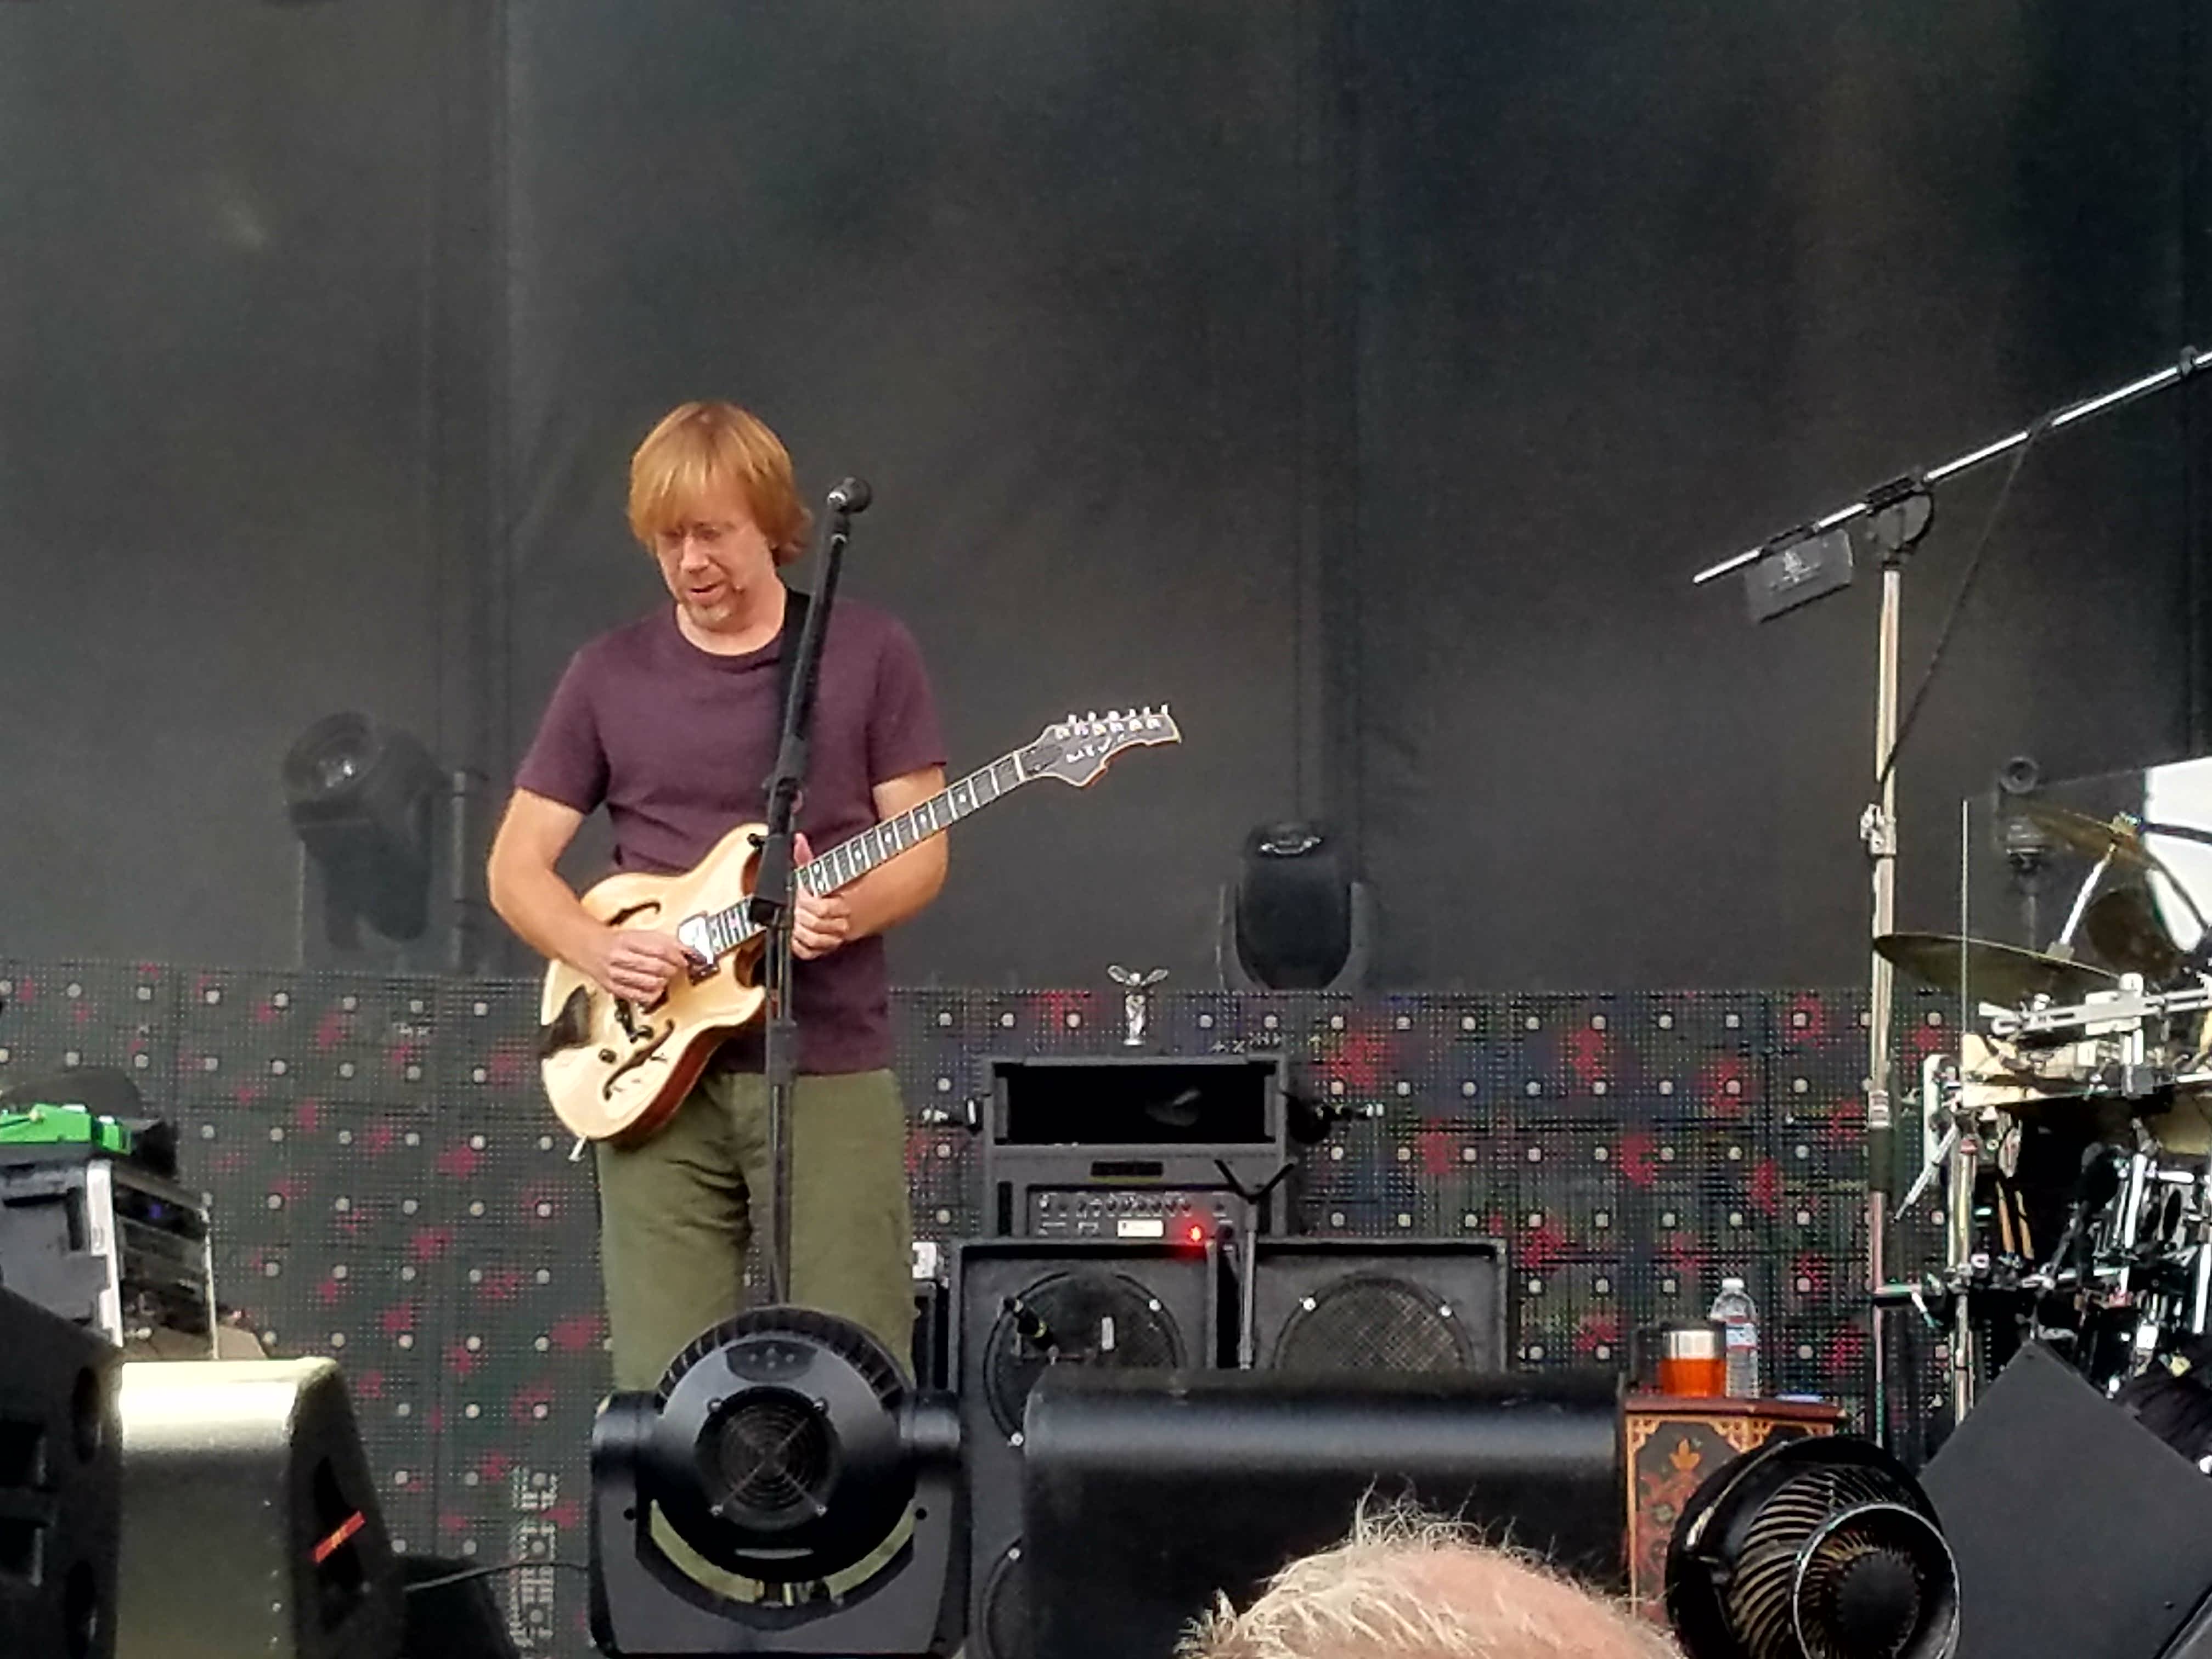 Trey at the Gorge 2016